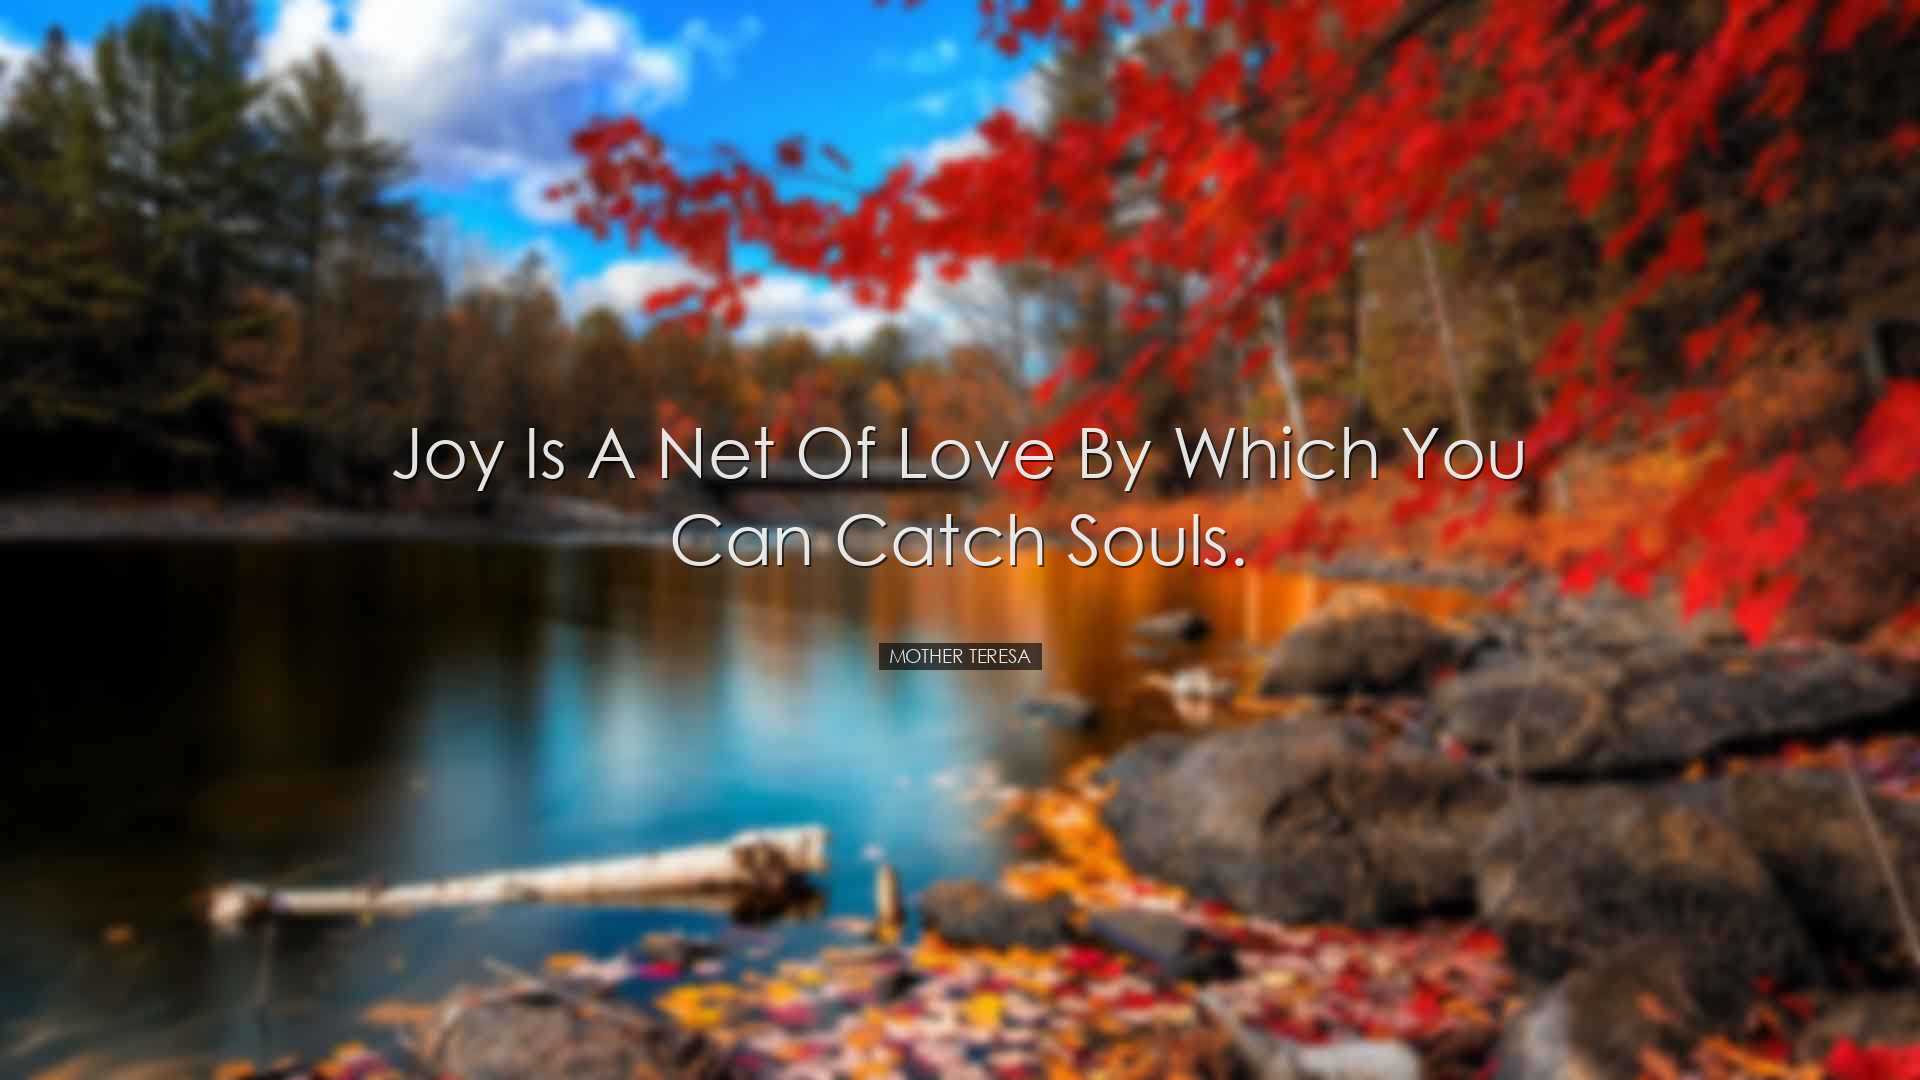 Joy is a net of love by which you can catch souls. - Mother Teresa